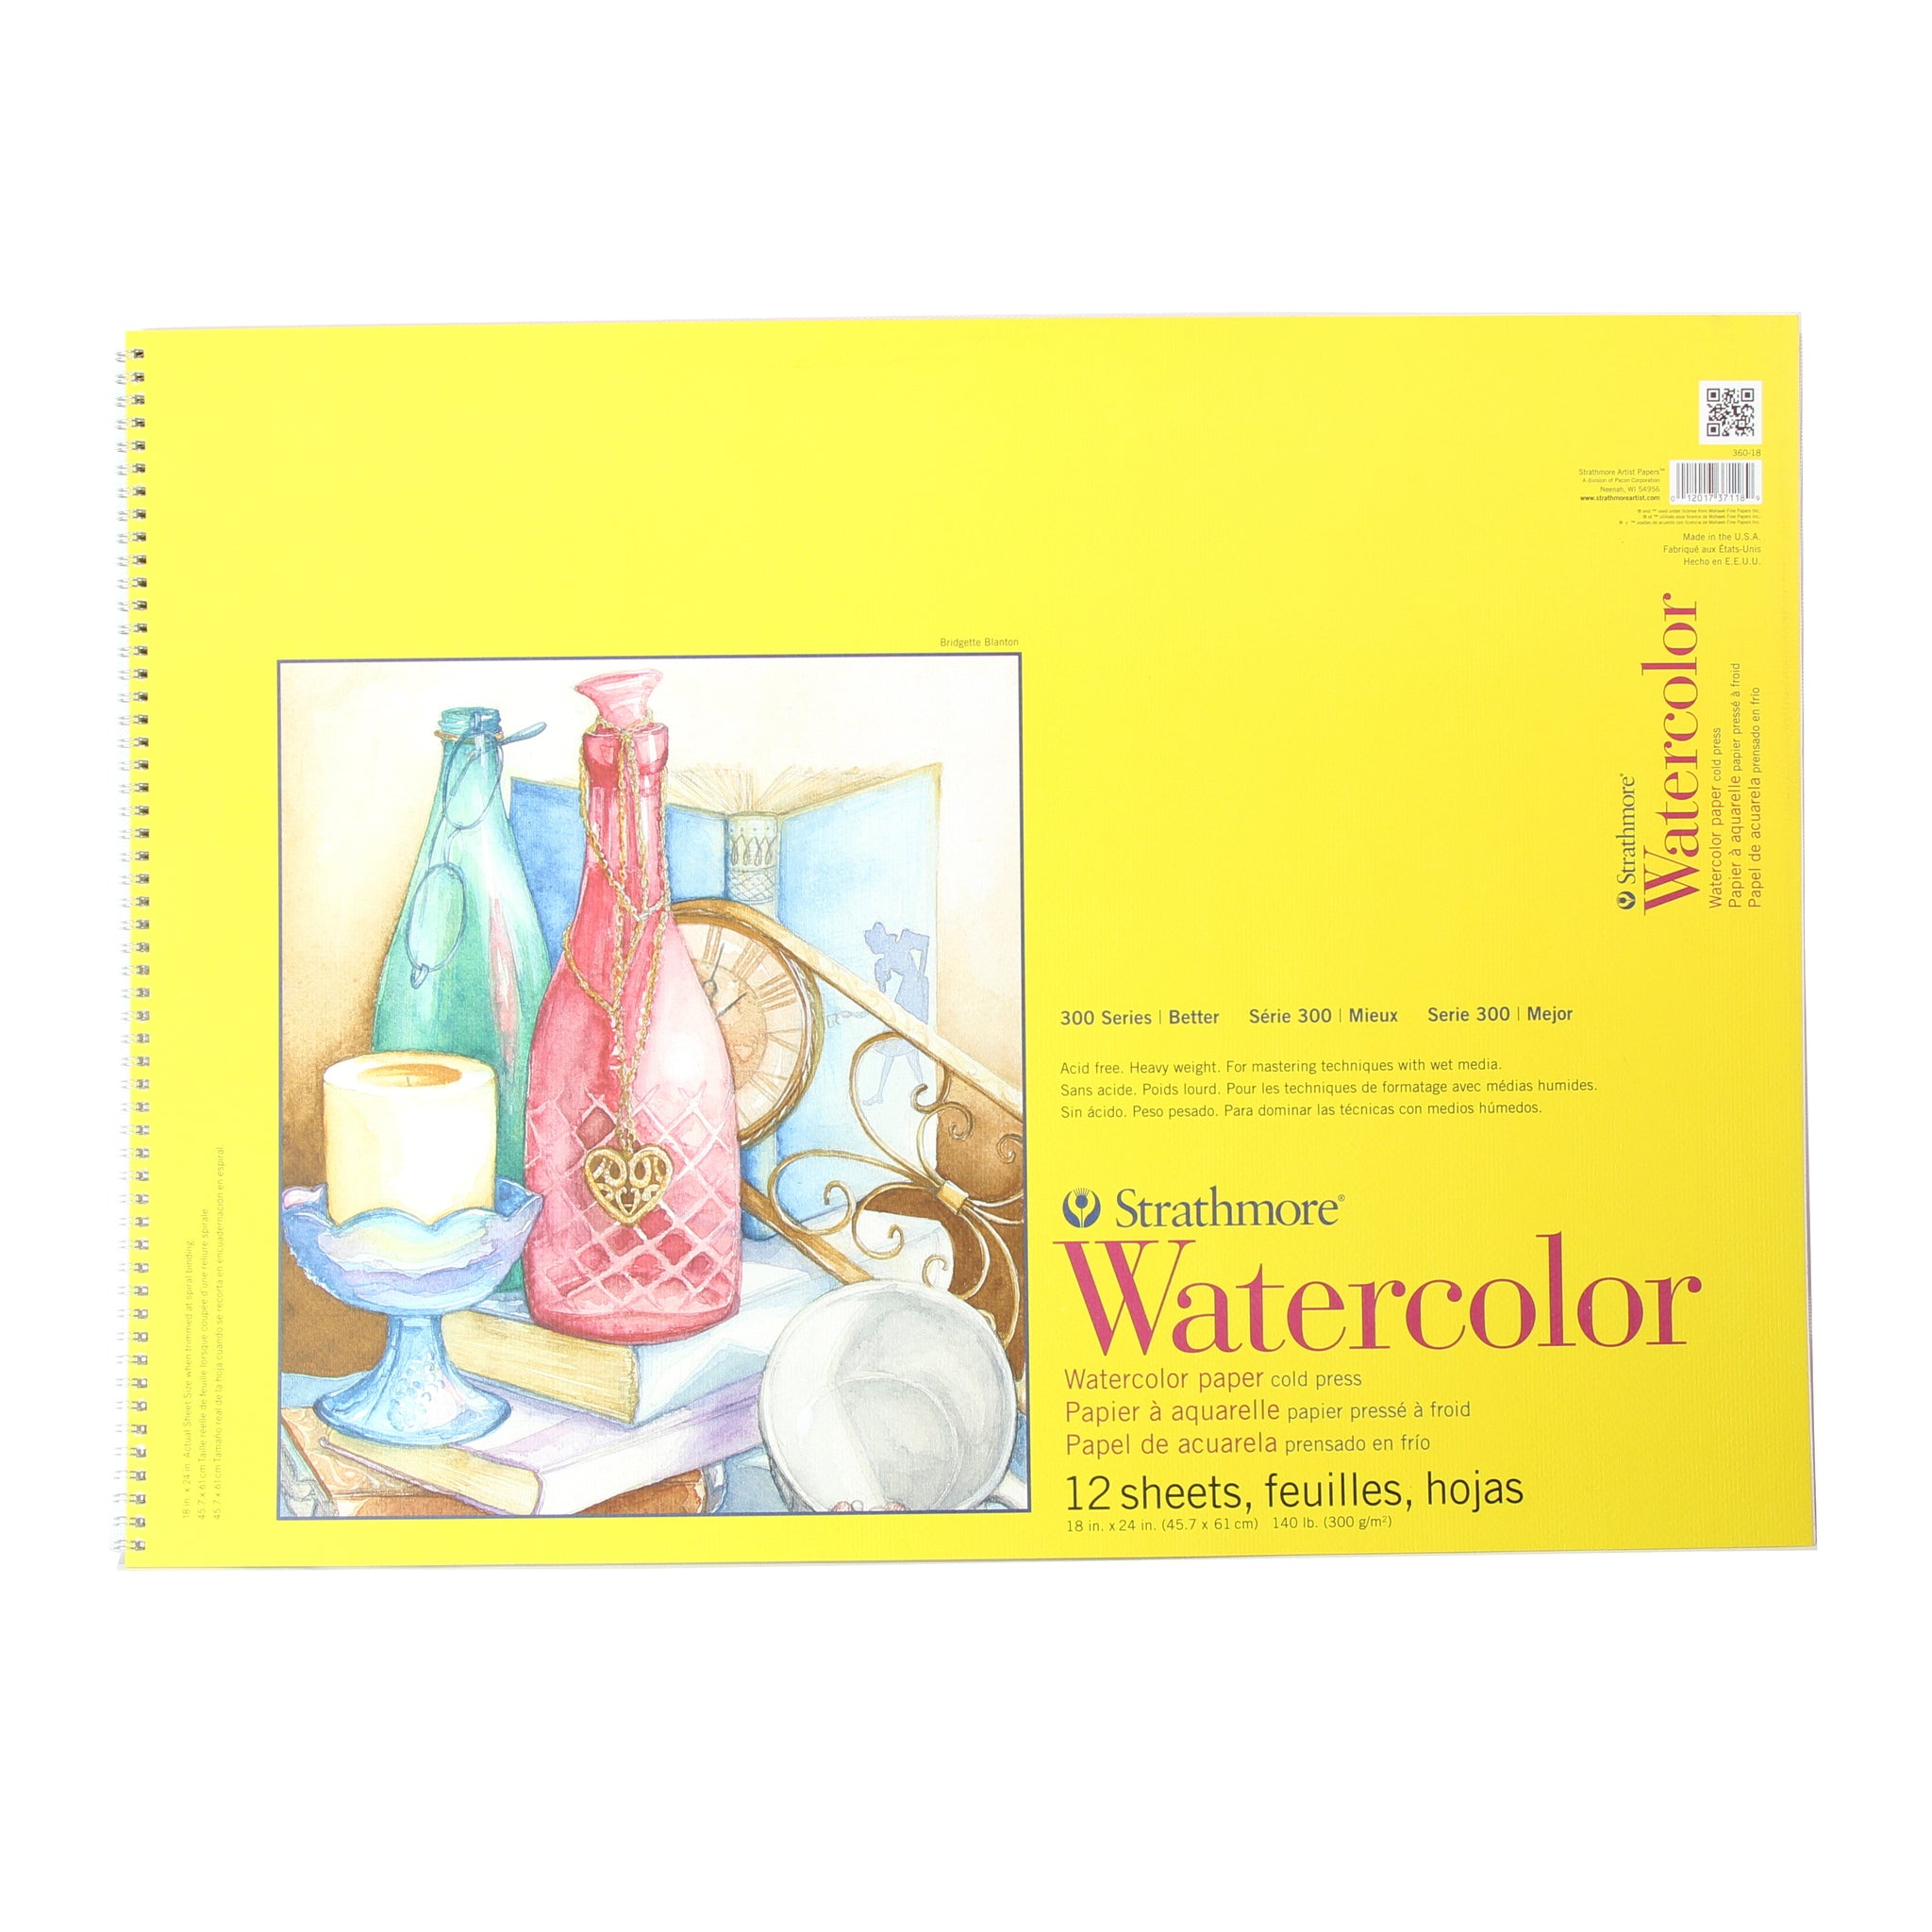 Watercolor Paper Pad 300 Series, Spiral-Bound, 9 x 12